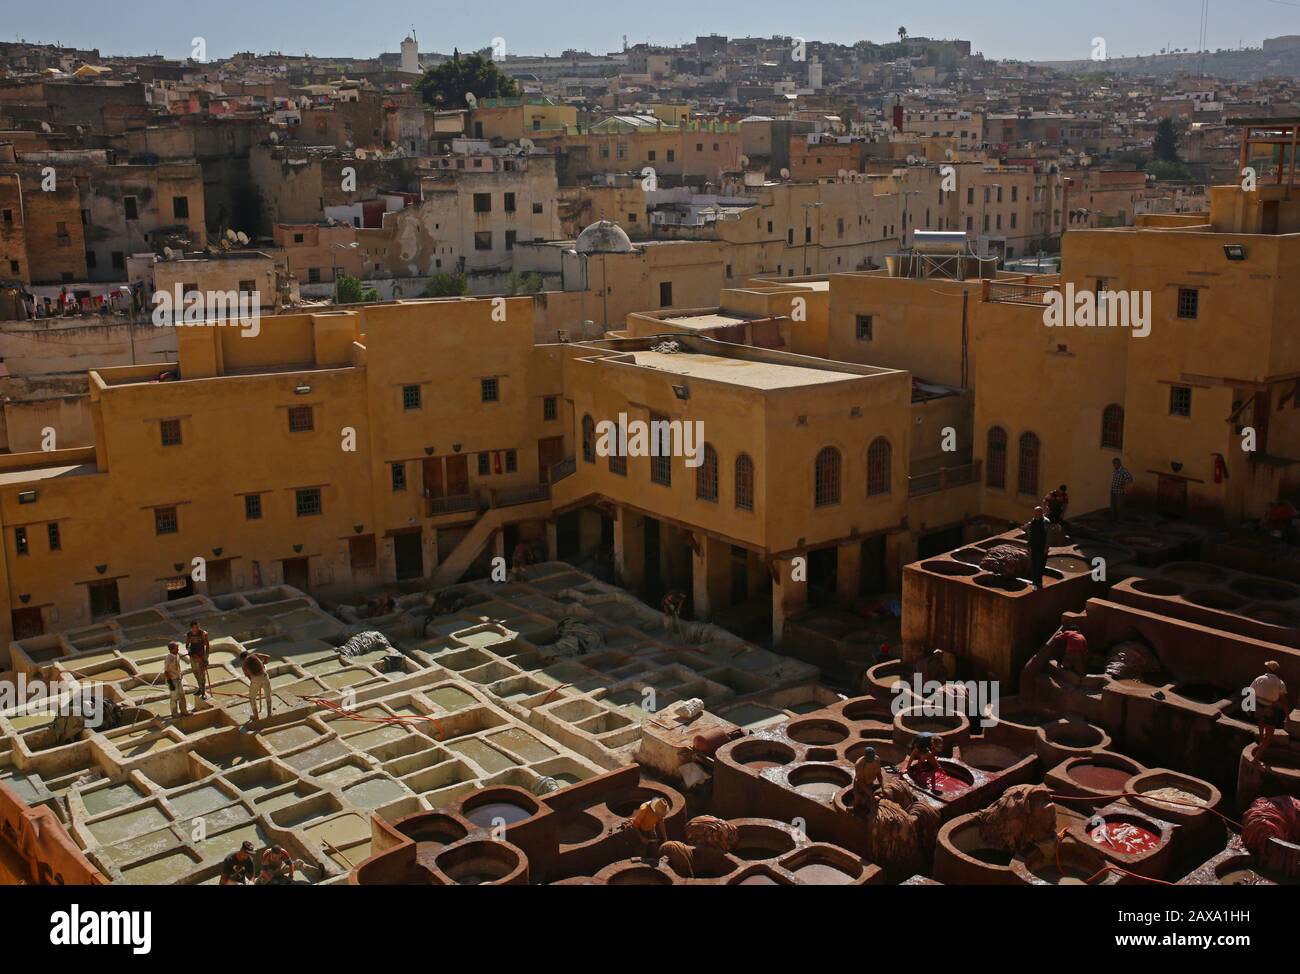 Workers are pictured in the Chouara Tannery in Fez, Morocco Stock Photo